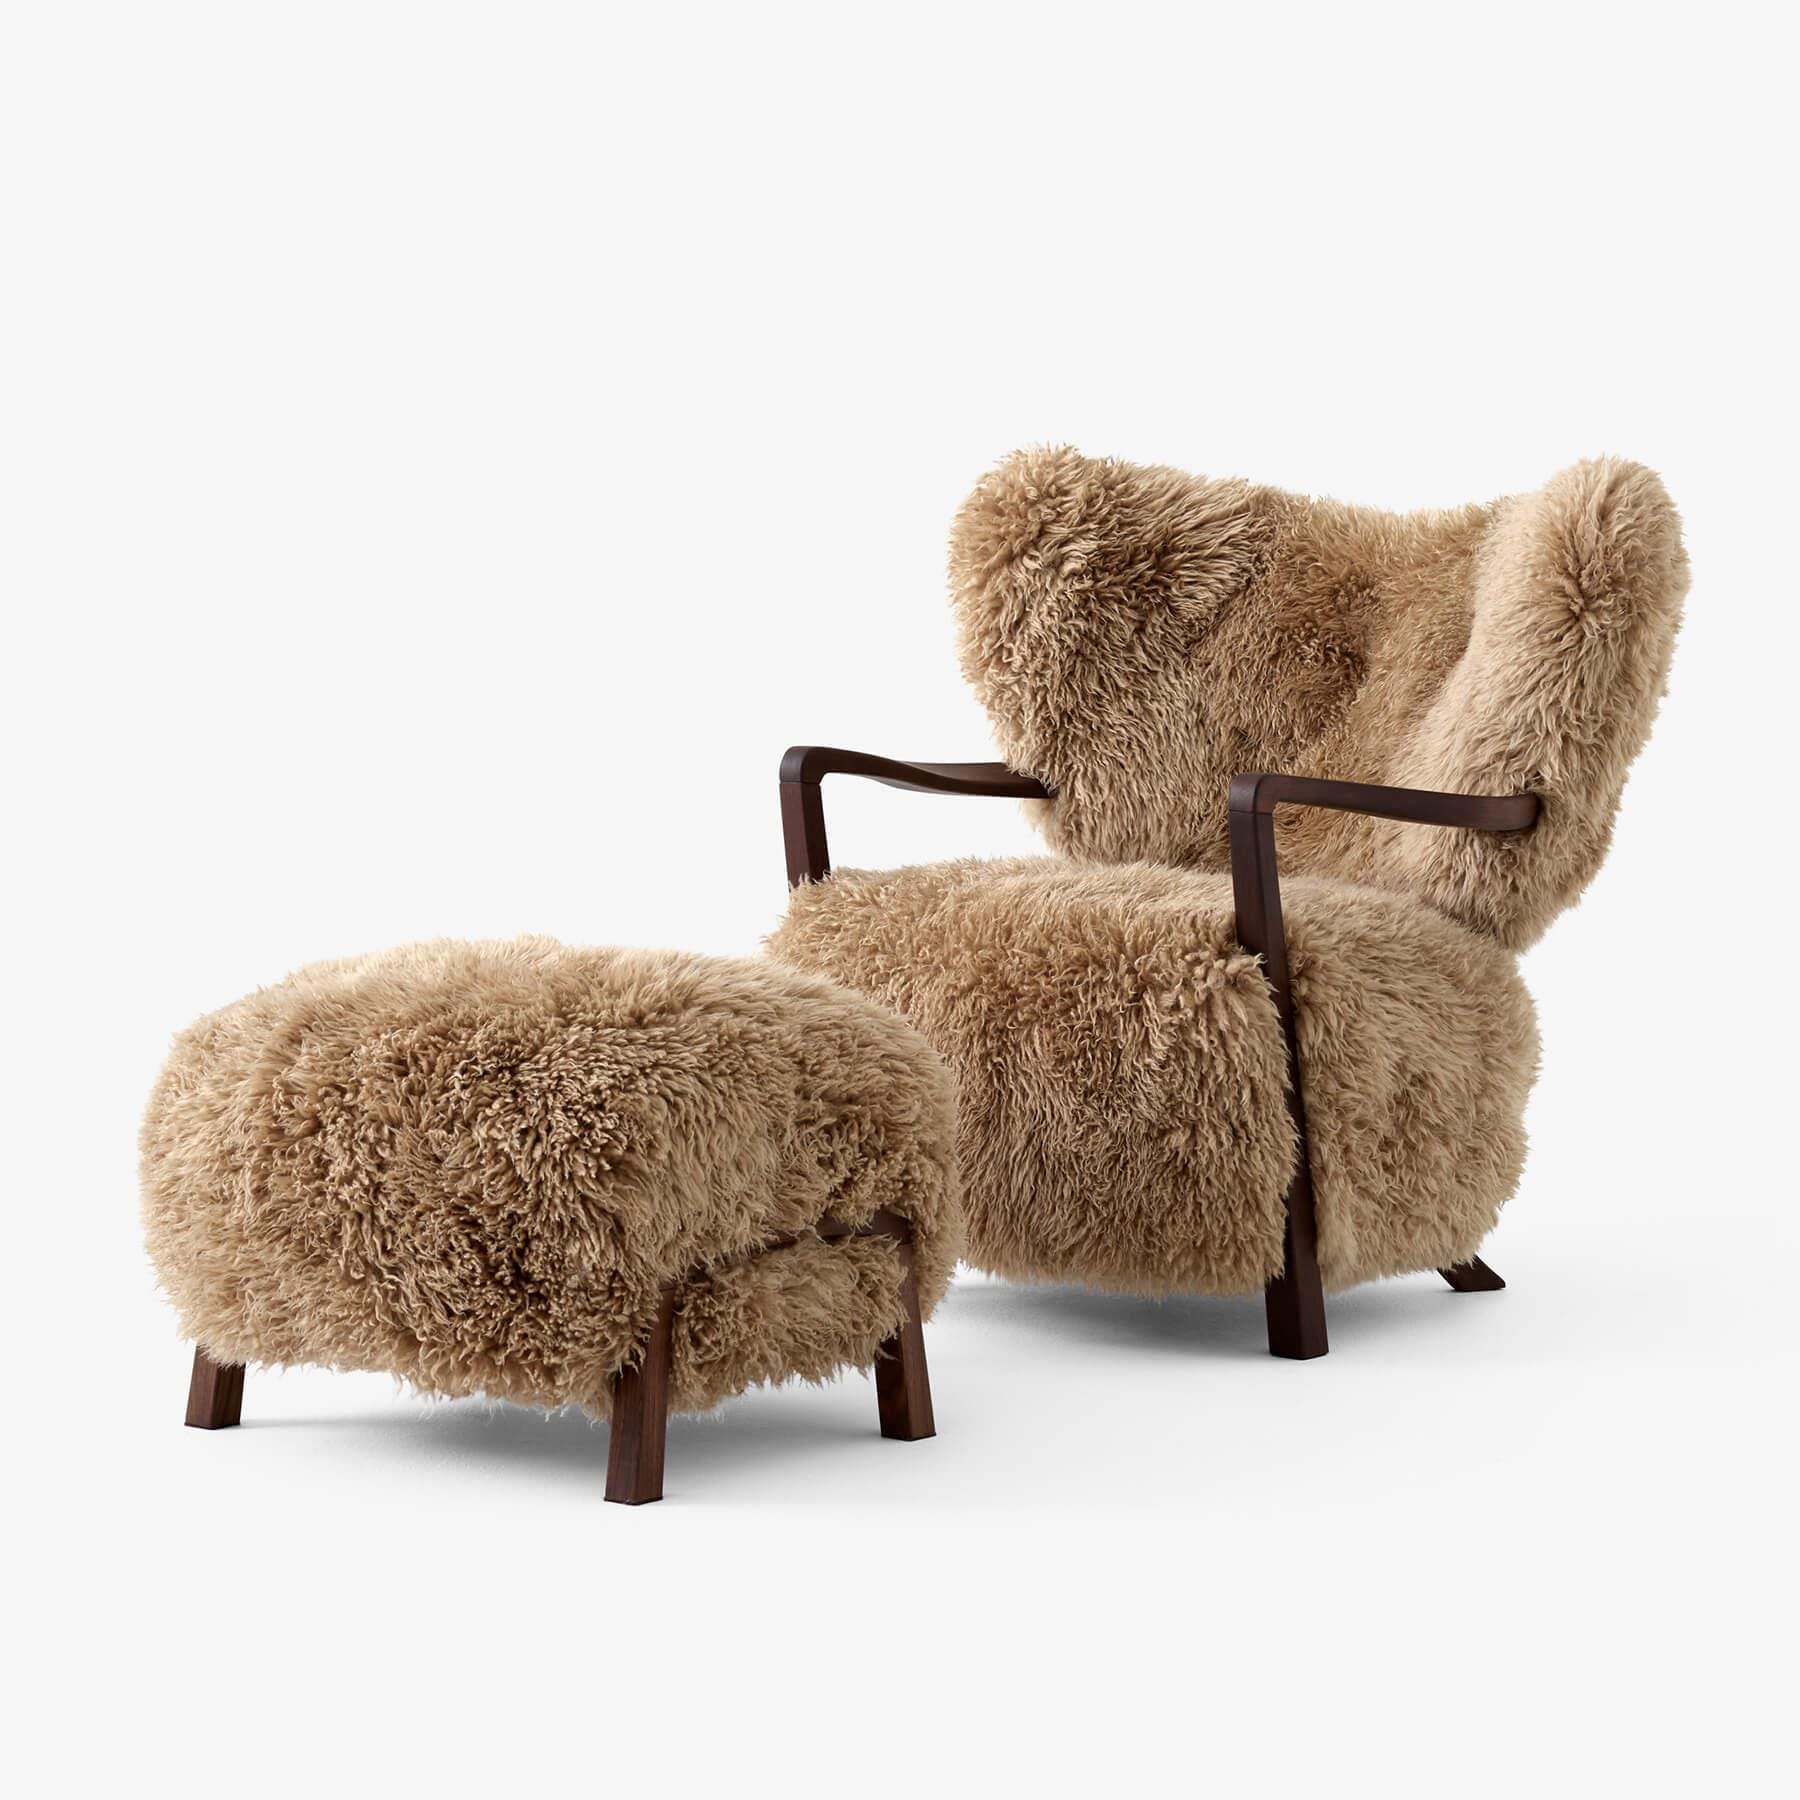 Tradition Wulff Adt2 Lounge Chair Sheepskin Honey Oiled Walnut With Ottoman Brown Designer Furniture From Holloways Of Ludlow